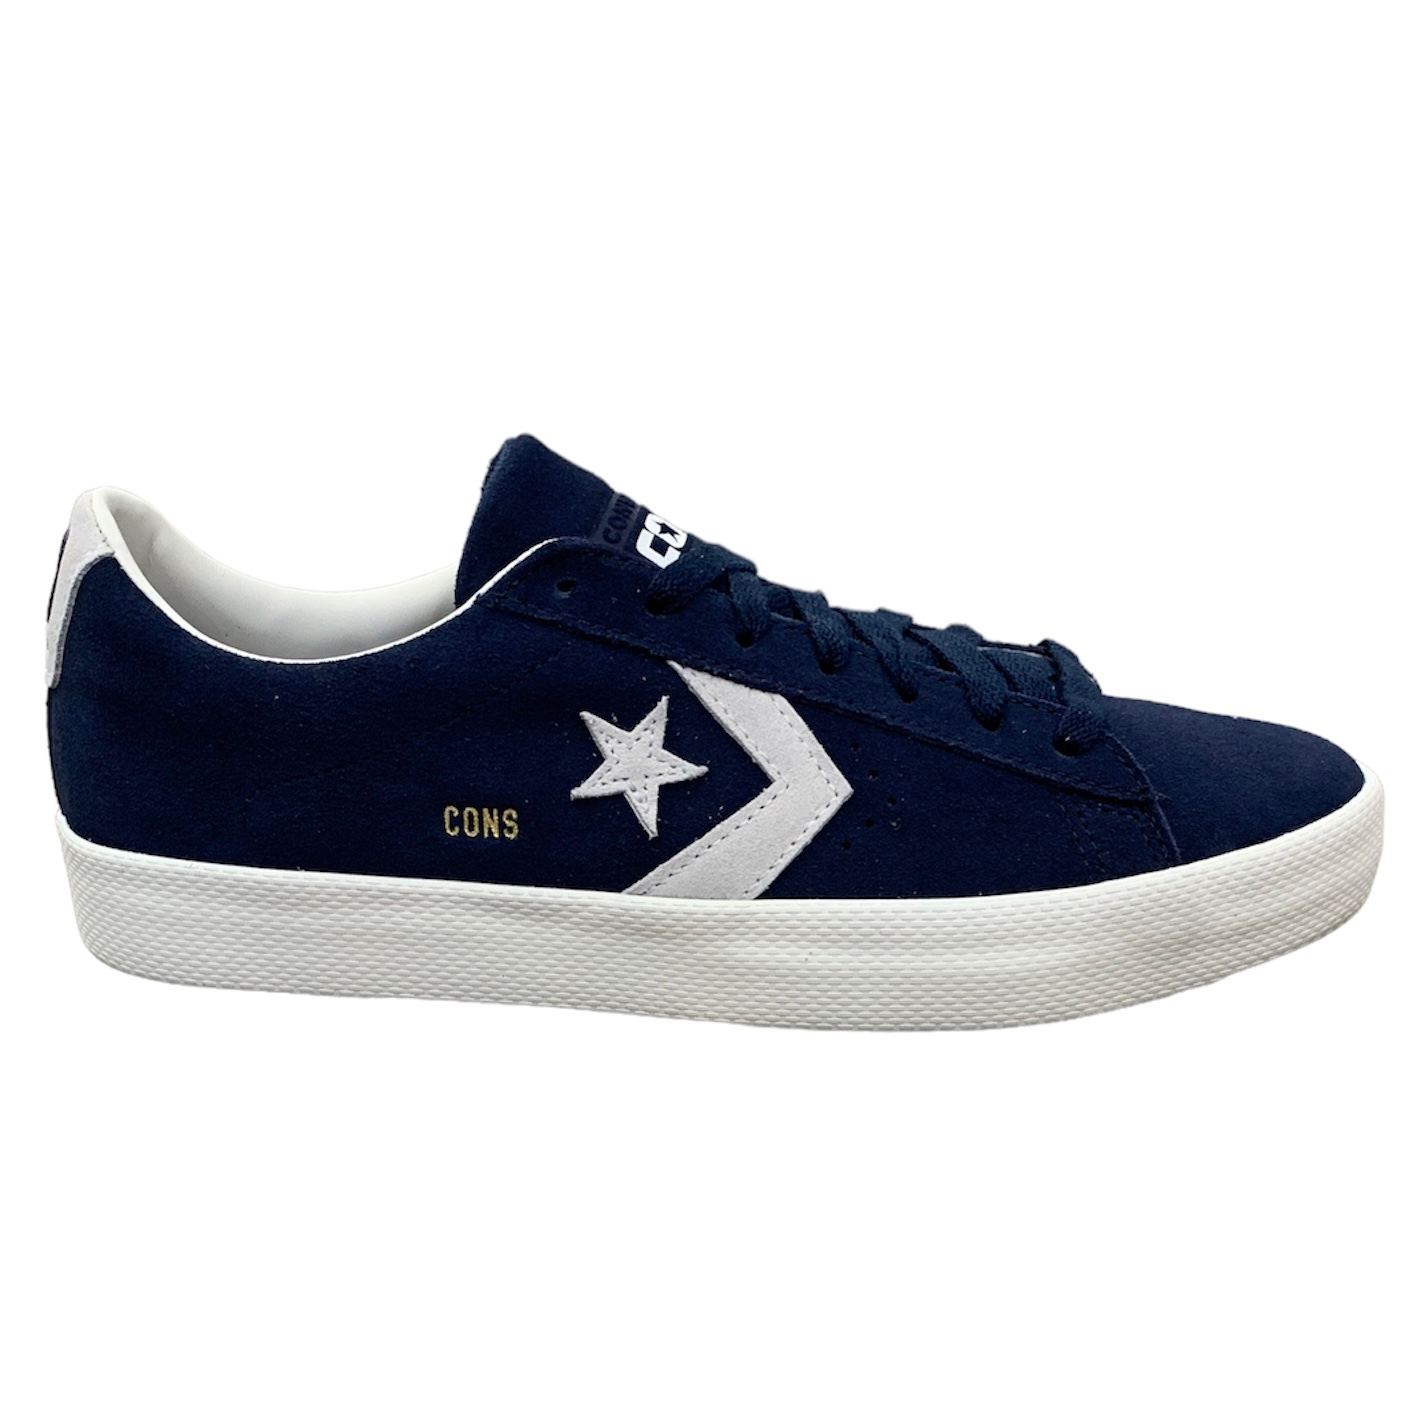 CONVERSE Pro Leather Vulc Ox (NVY/WHT) Mens at Surf